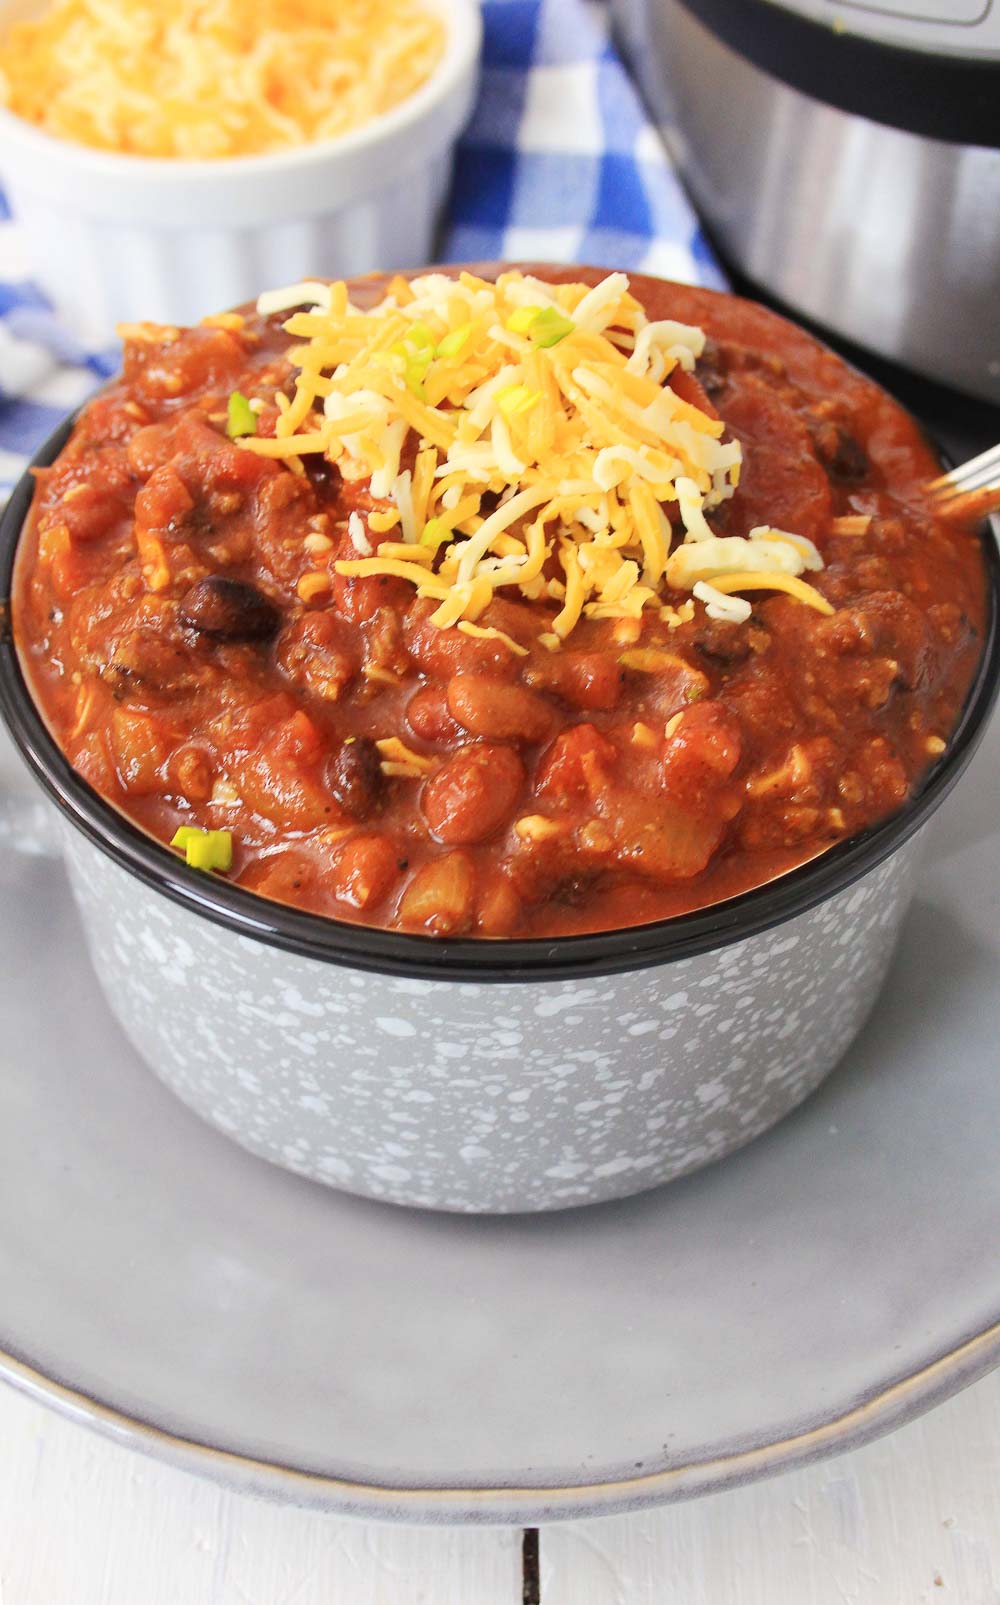 Three Bean Chili is a delicious weeknight meal and awesome as leftovers. Made in an Instant Pot in less than 30 minutes, this chili is hearty, full of flavor, and easy to make.